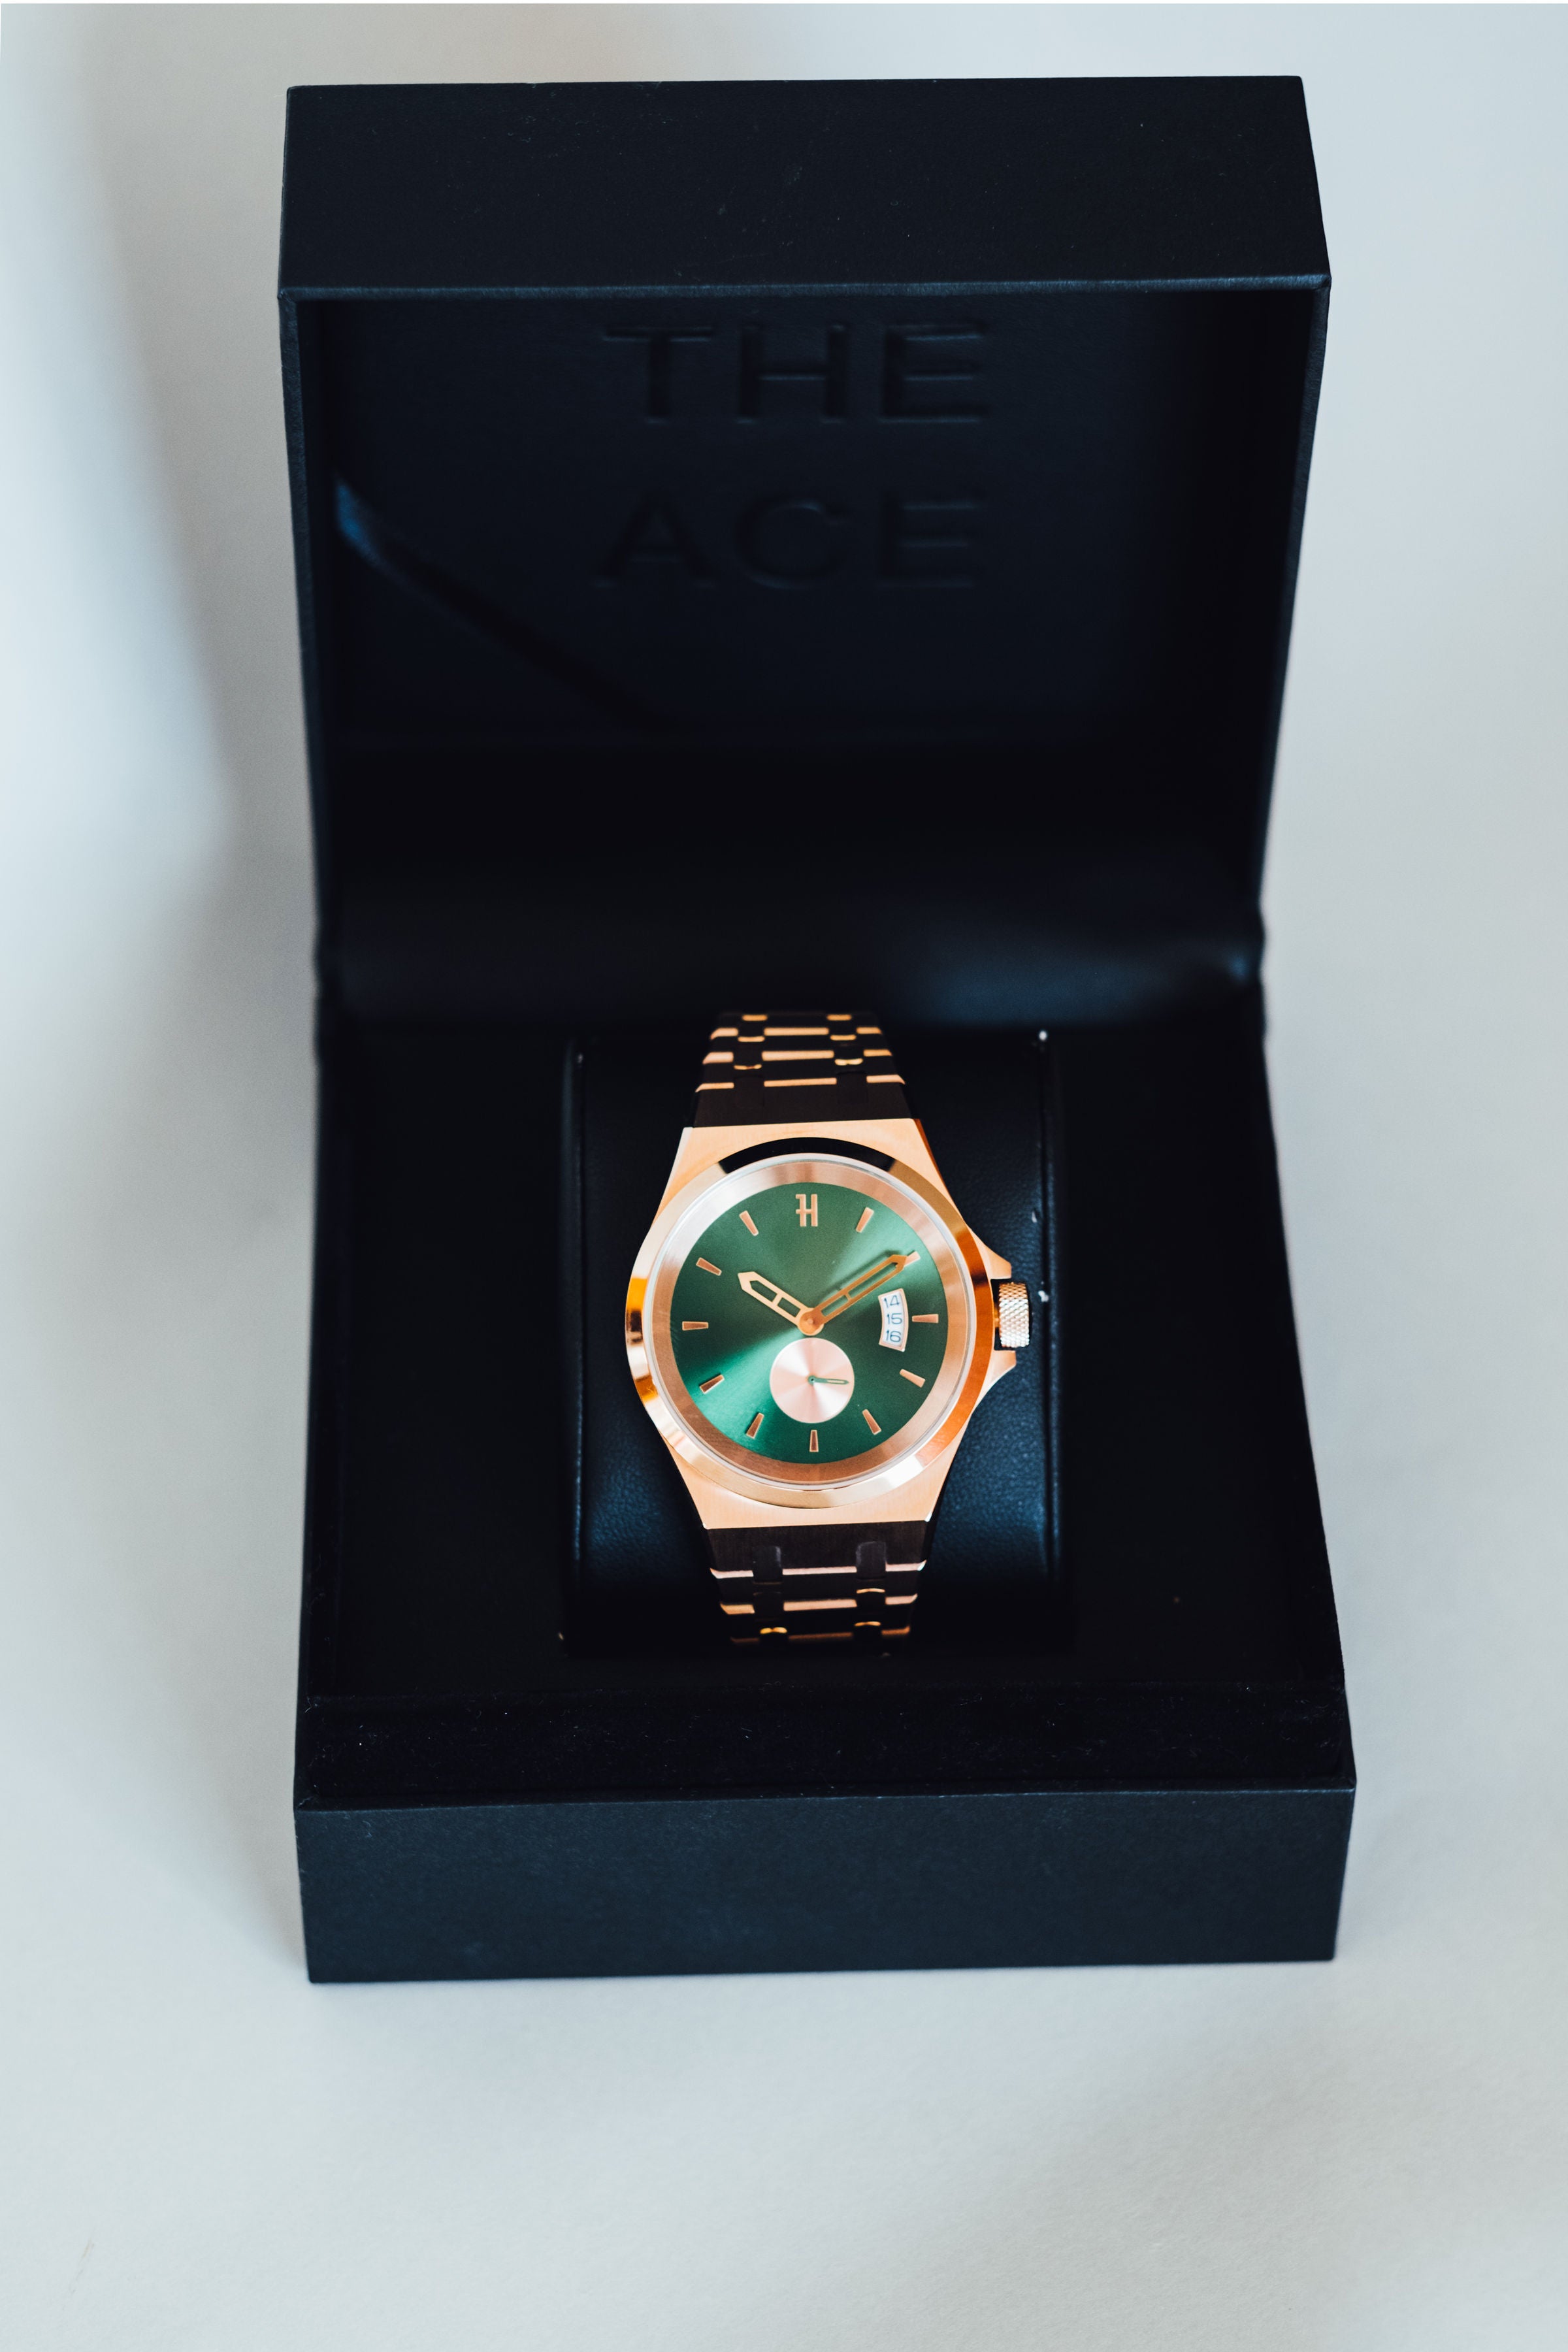 THE ACE - EMERALD ROSE GOLD MENS WATCH